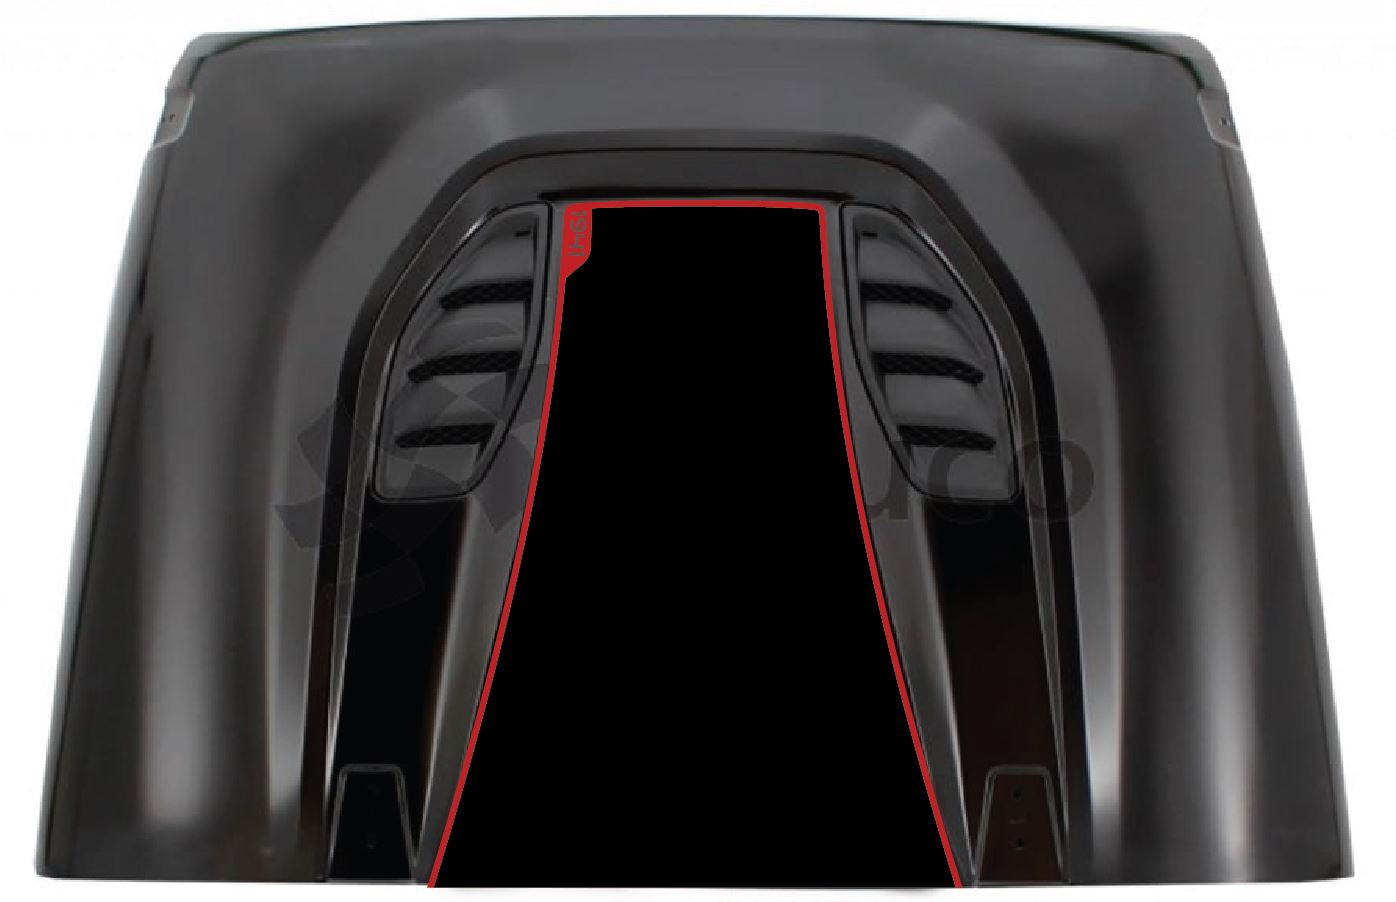 Hard Rock/10th Anniversary 2-Layer 1941 Red Line Rubicon Blackout Hood Decal- Fits Jeep Wrangler JK